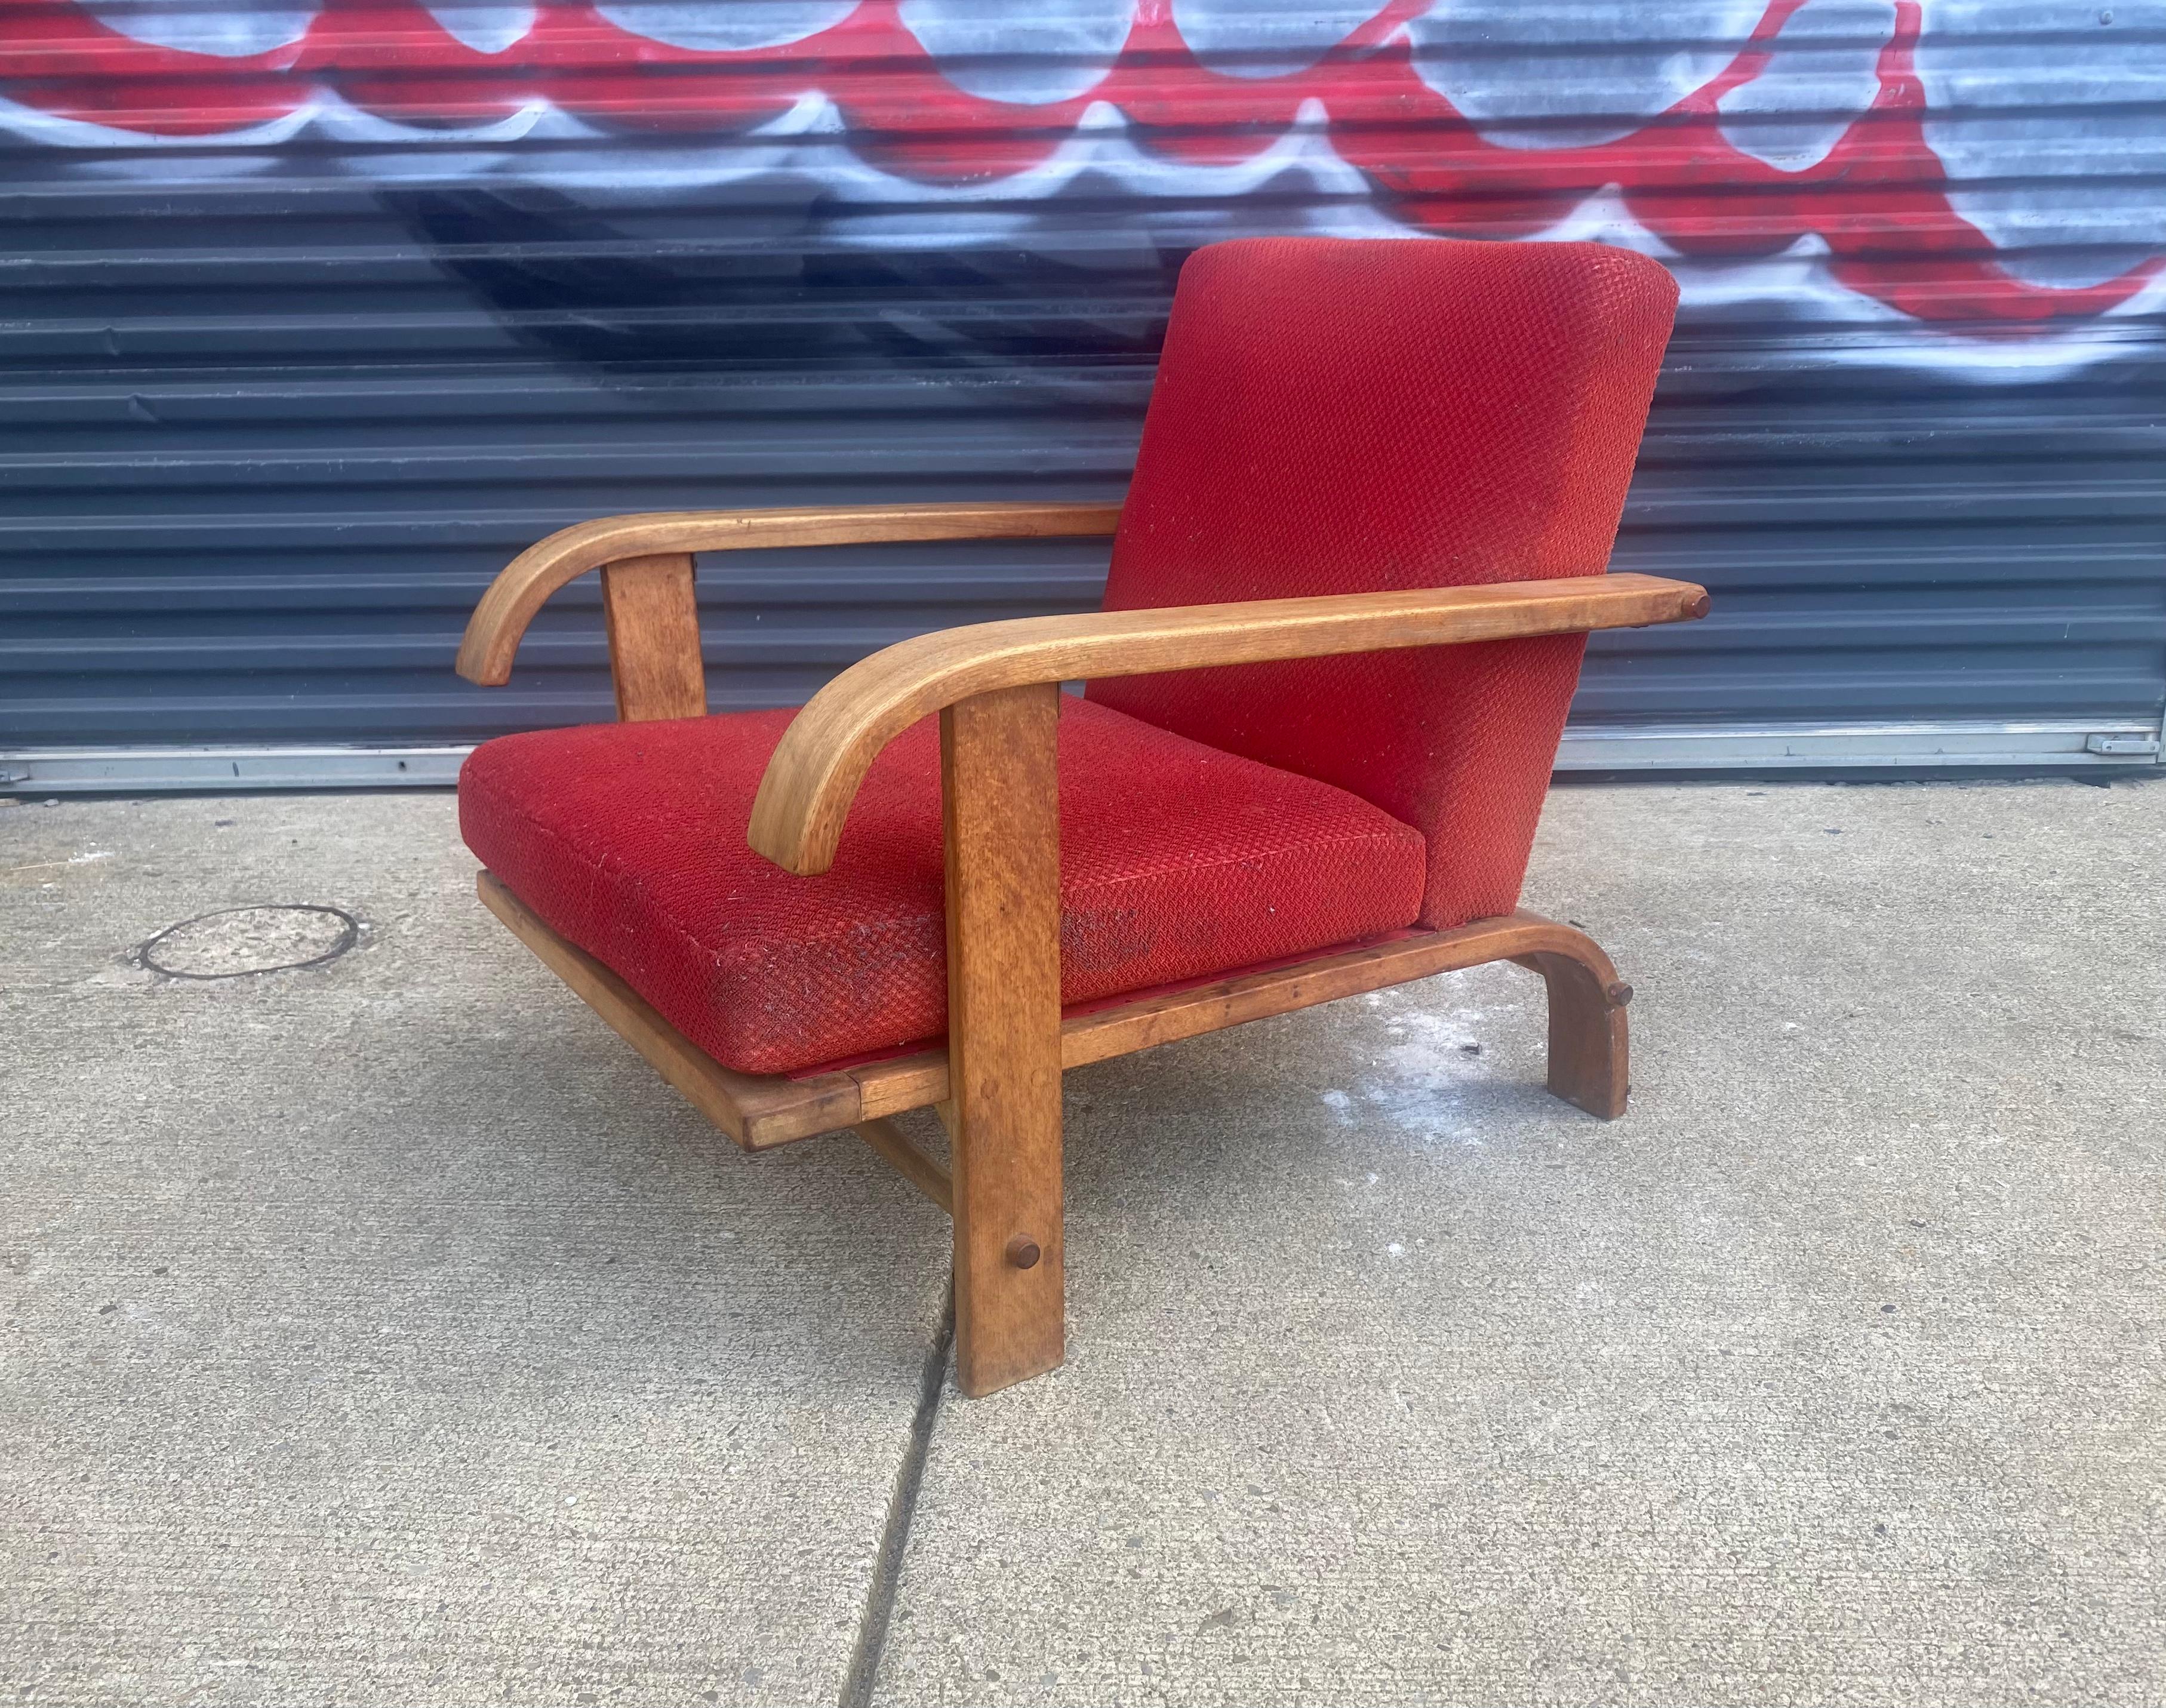 Rare Art Deco easy chair designed by Russel Wright for Conant Ball American modern in 1935 ,solid maple contraction with original cushions retains original finish ,patina..,, signed with company mark and model number.. Extremely comfortable,,Hand